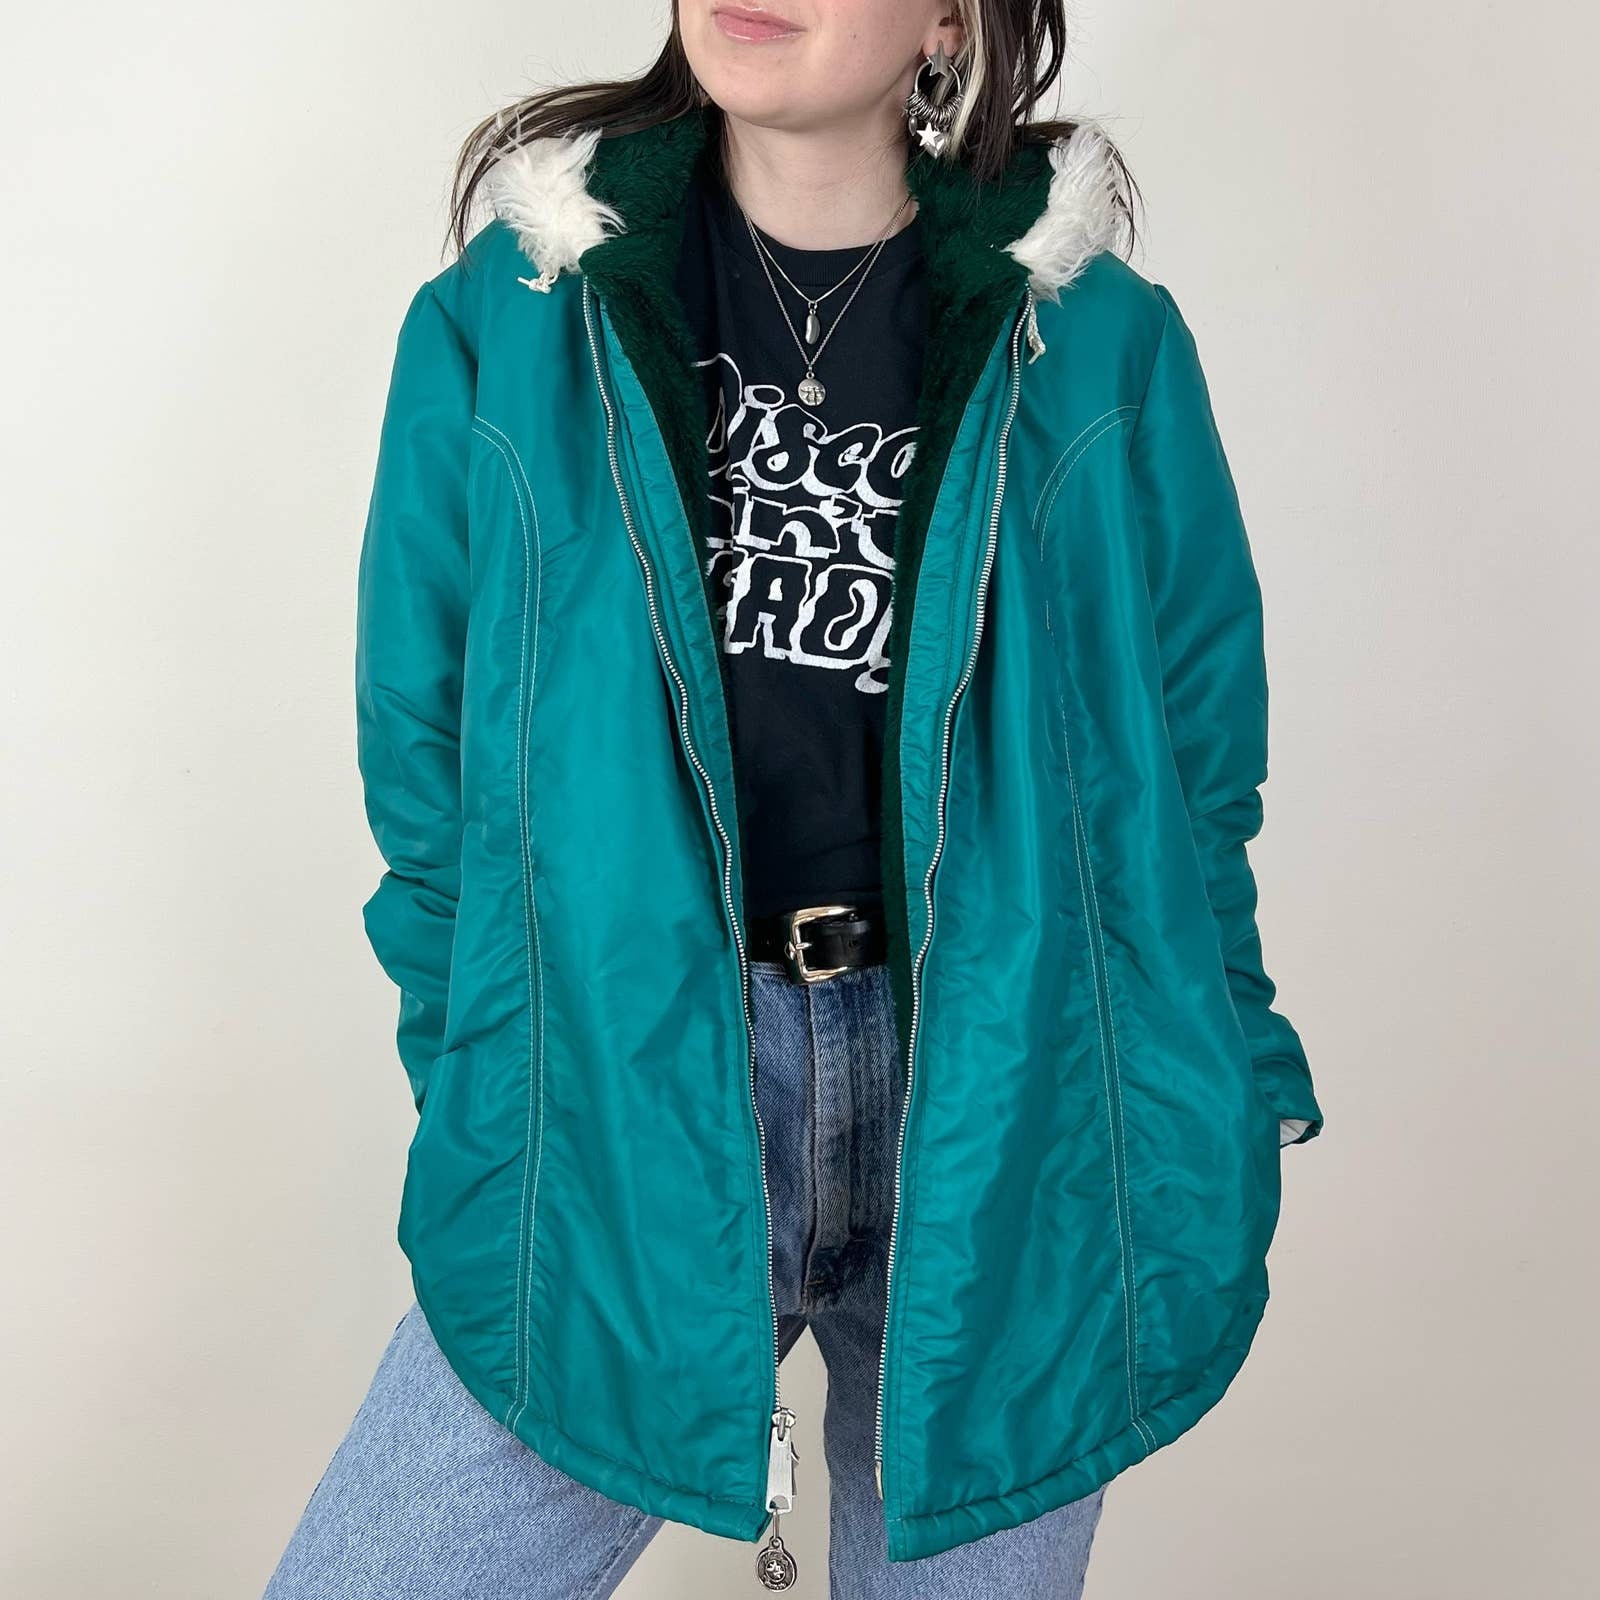 Vintage 60s Teal Green Ski Puffer Jacket With White Faux Fur Hood - Etsy